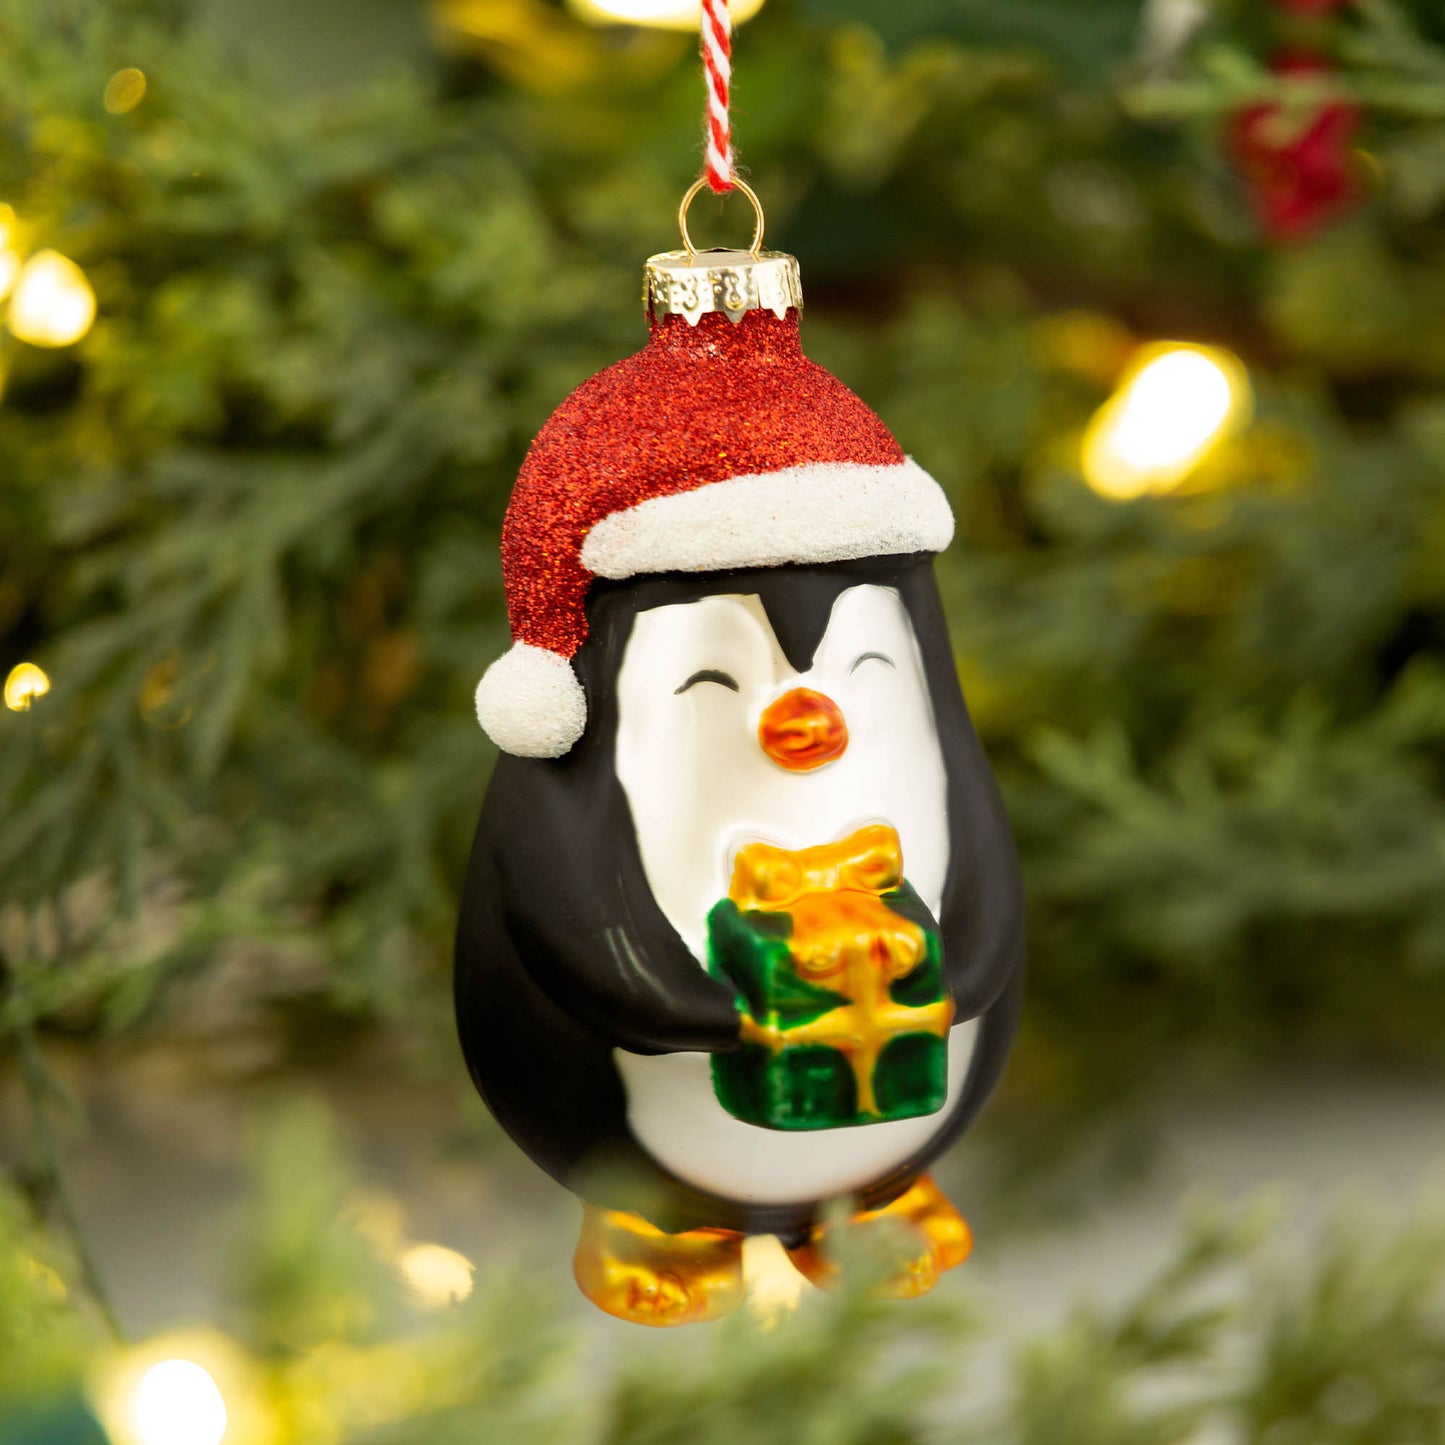 Adorable Animal Glass Bauble Ornament